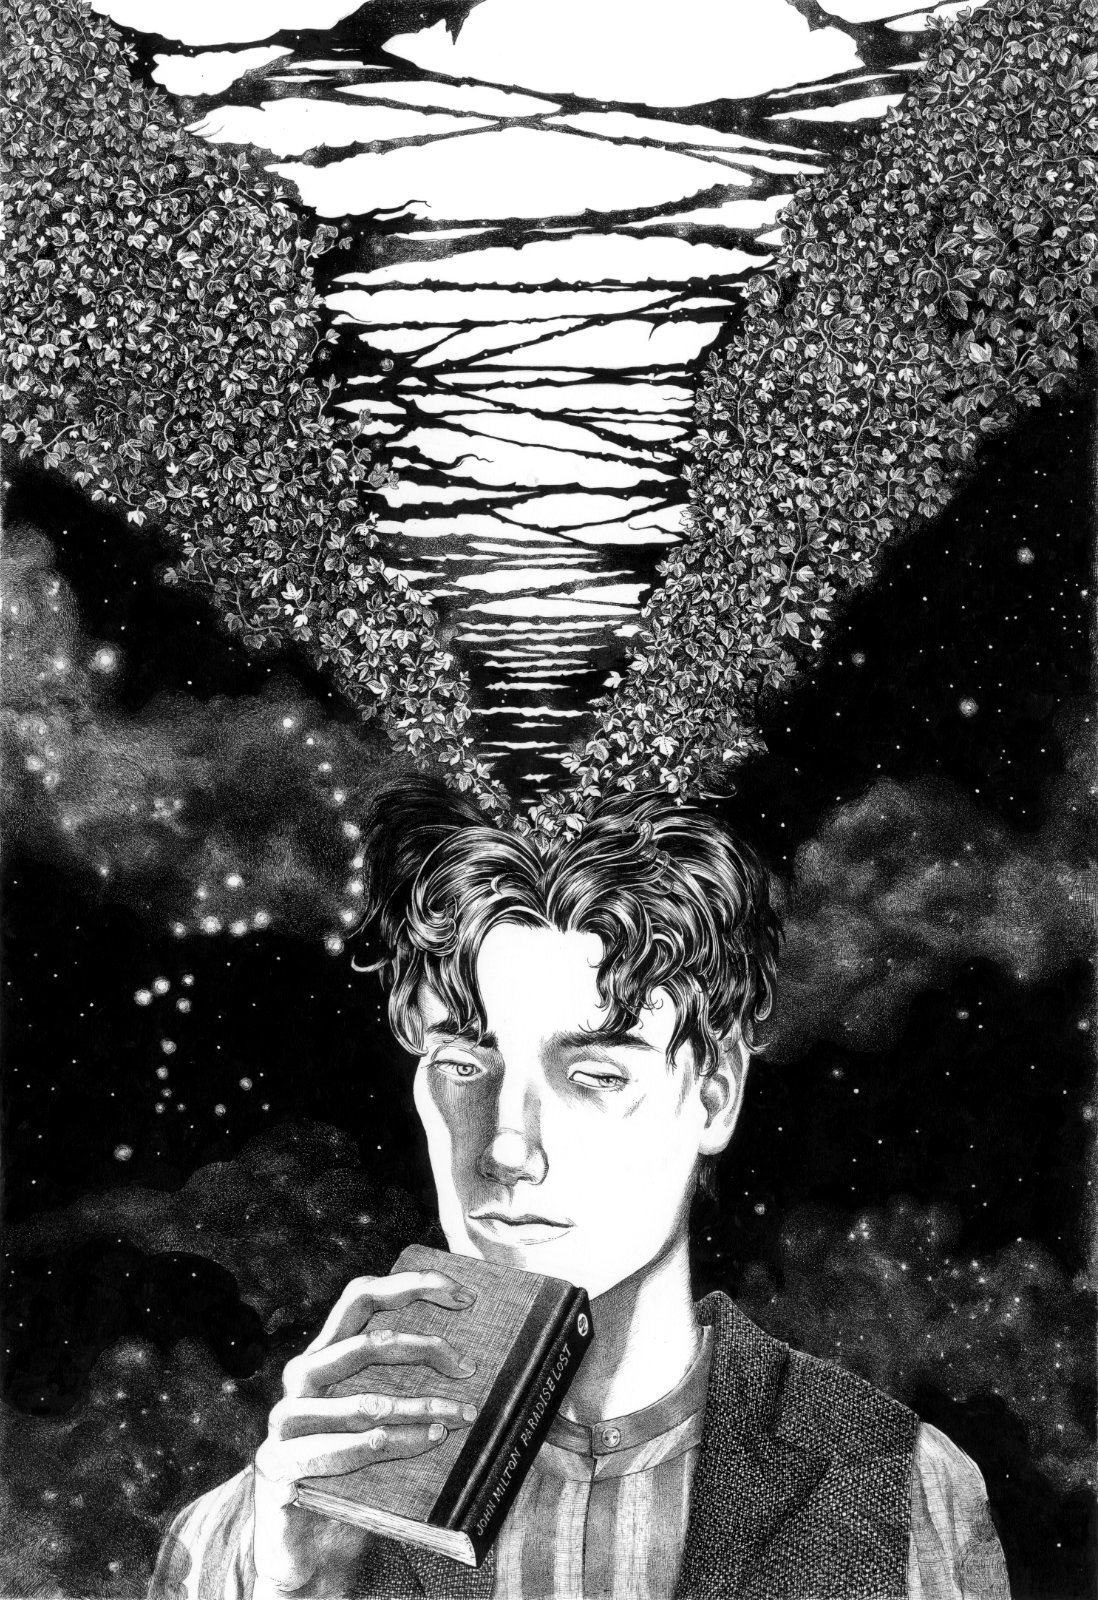 Fern Adelstadt, a teenager boy in edwardian era holding the book “Paradise Lost” by John Milton while Ivy is tearing away his whole universe. Mainly ink with touches of Pigma Sakura Micron on 200g Schoellehammer Durex Technical paper smooth, 21 x 29.7 cm